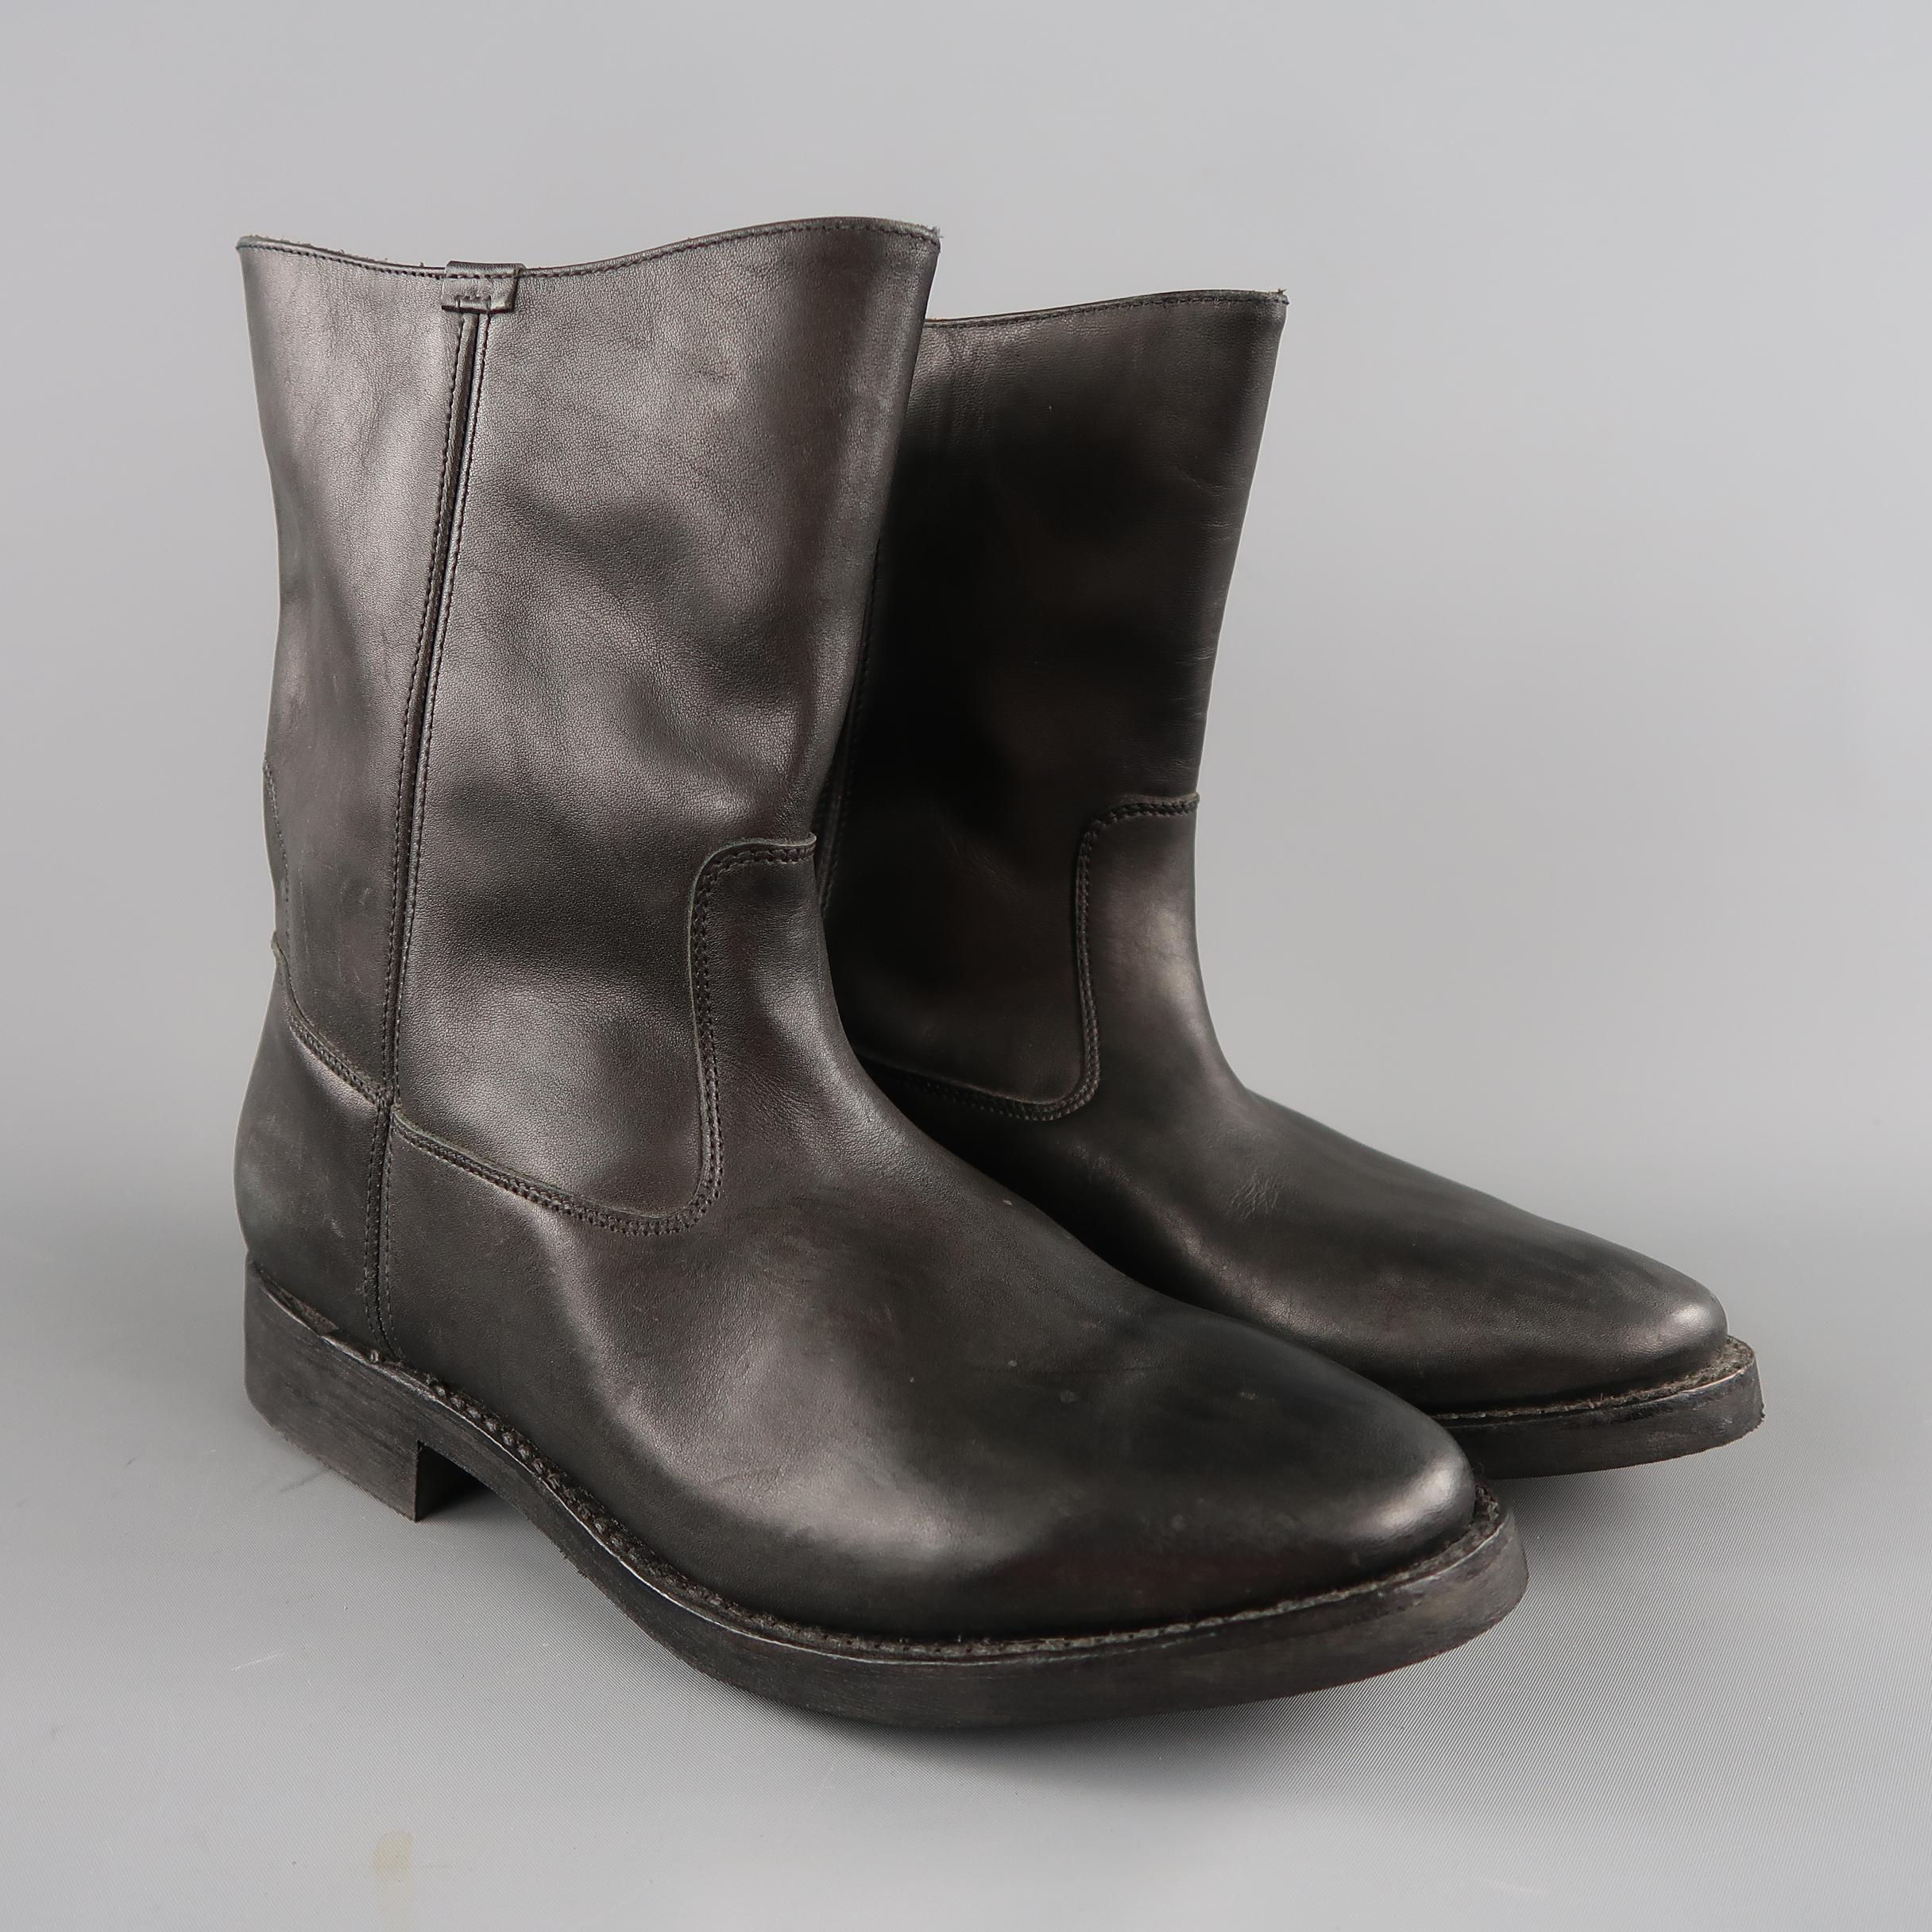 GOLDEN GOOSE pull on biker boots come in black smooth leather with a mid calf shaft and rubber sole. Made in Italy.
 
Excellent Pre-Owned Condition.
Marked:IT 44
 
Measurements:
 
Length: 9 in.
Outsole: 12 x 4.5 in.